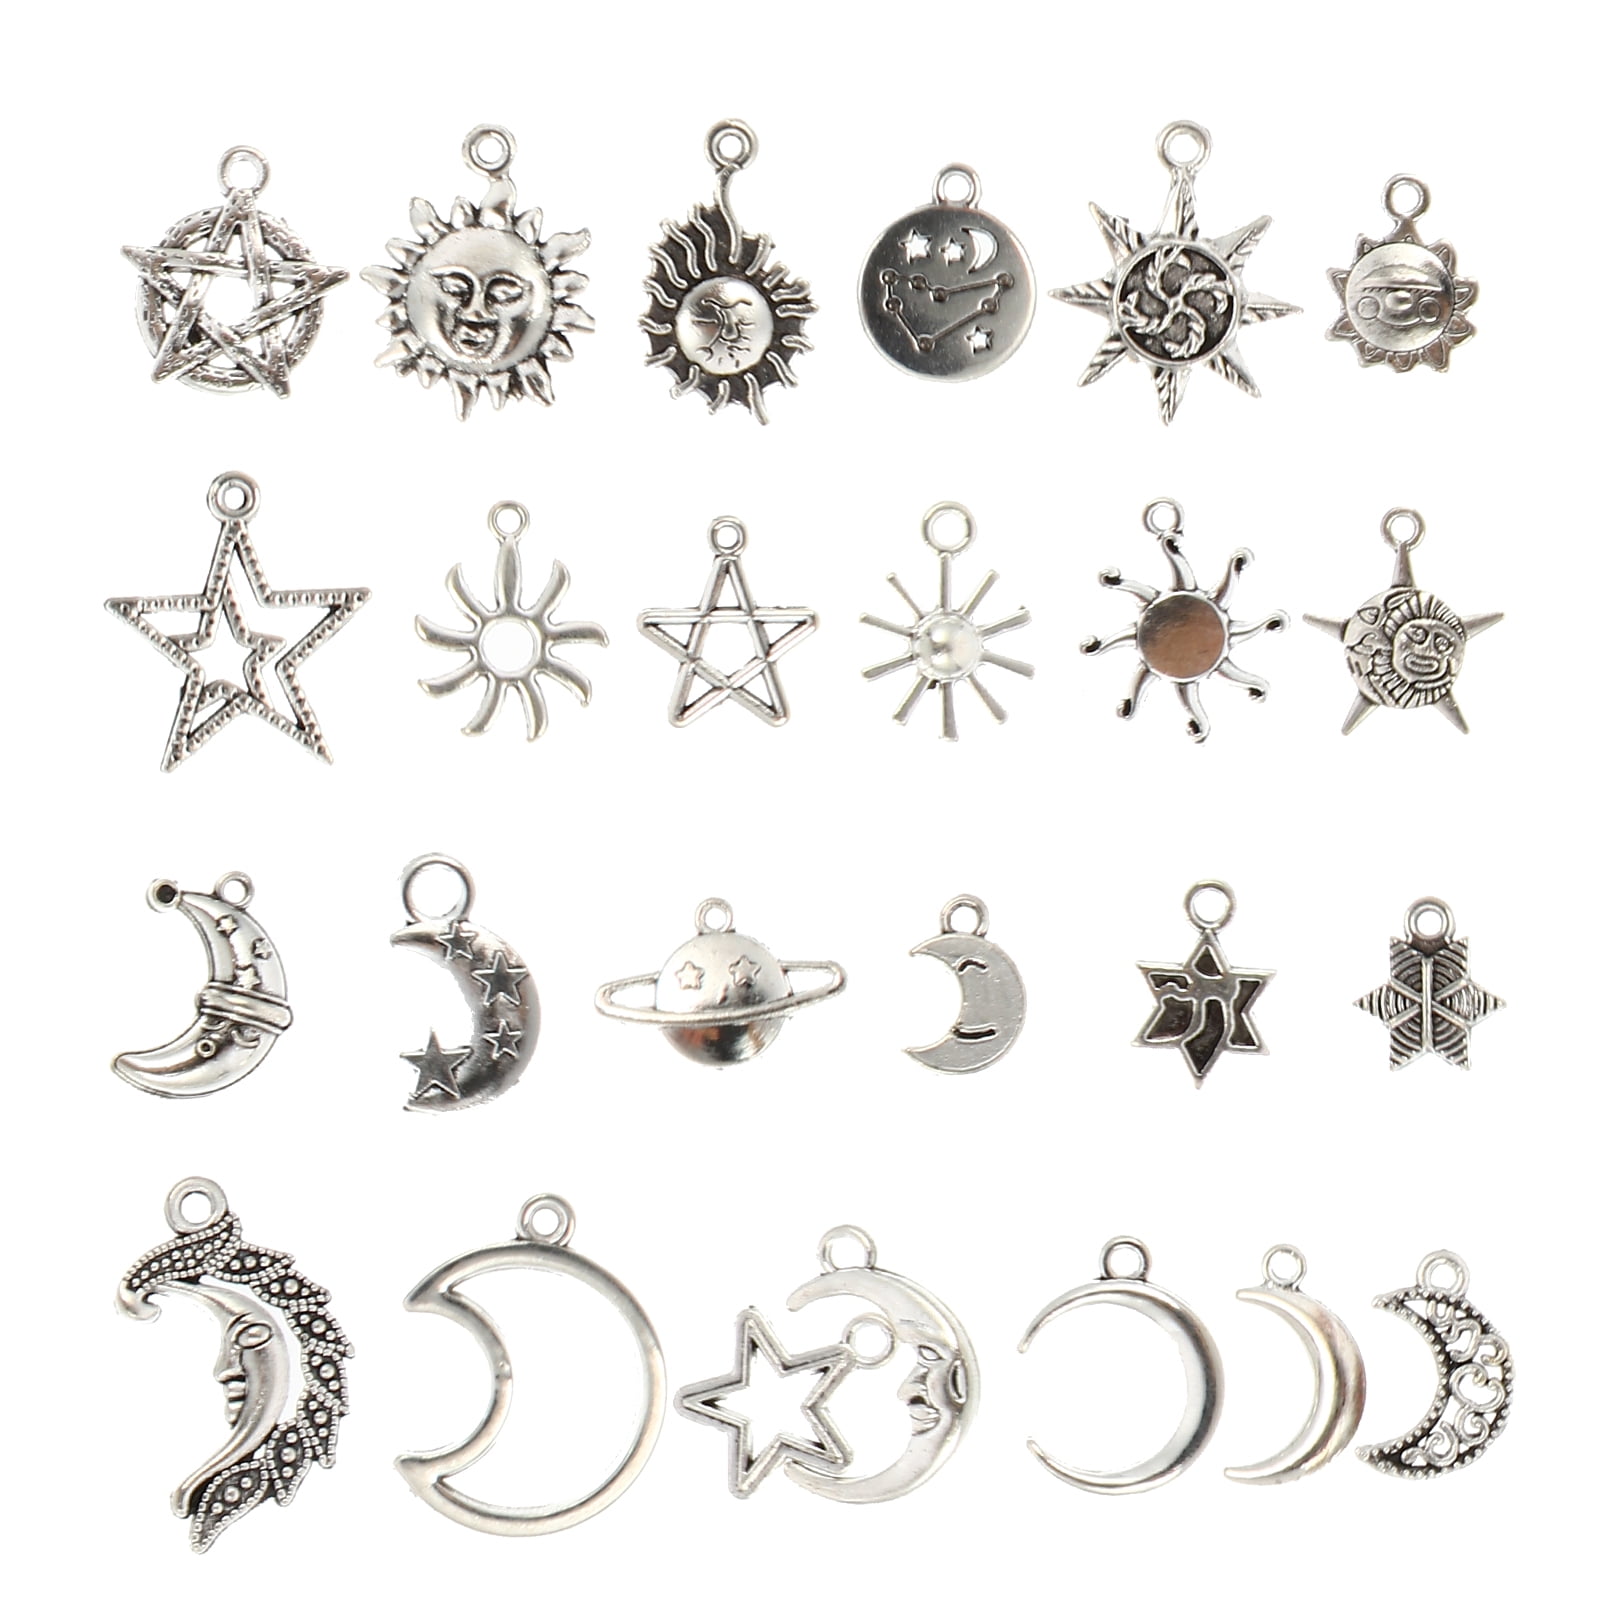 20 Star Charms, Small Flat Double Sided Stars, Jewelry Making Supplies,  Handmade Celestial Witchy Jewelry, Set of 20 